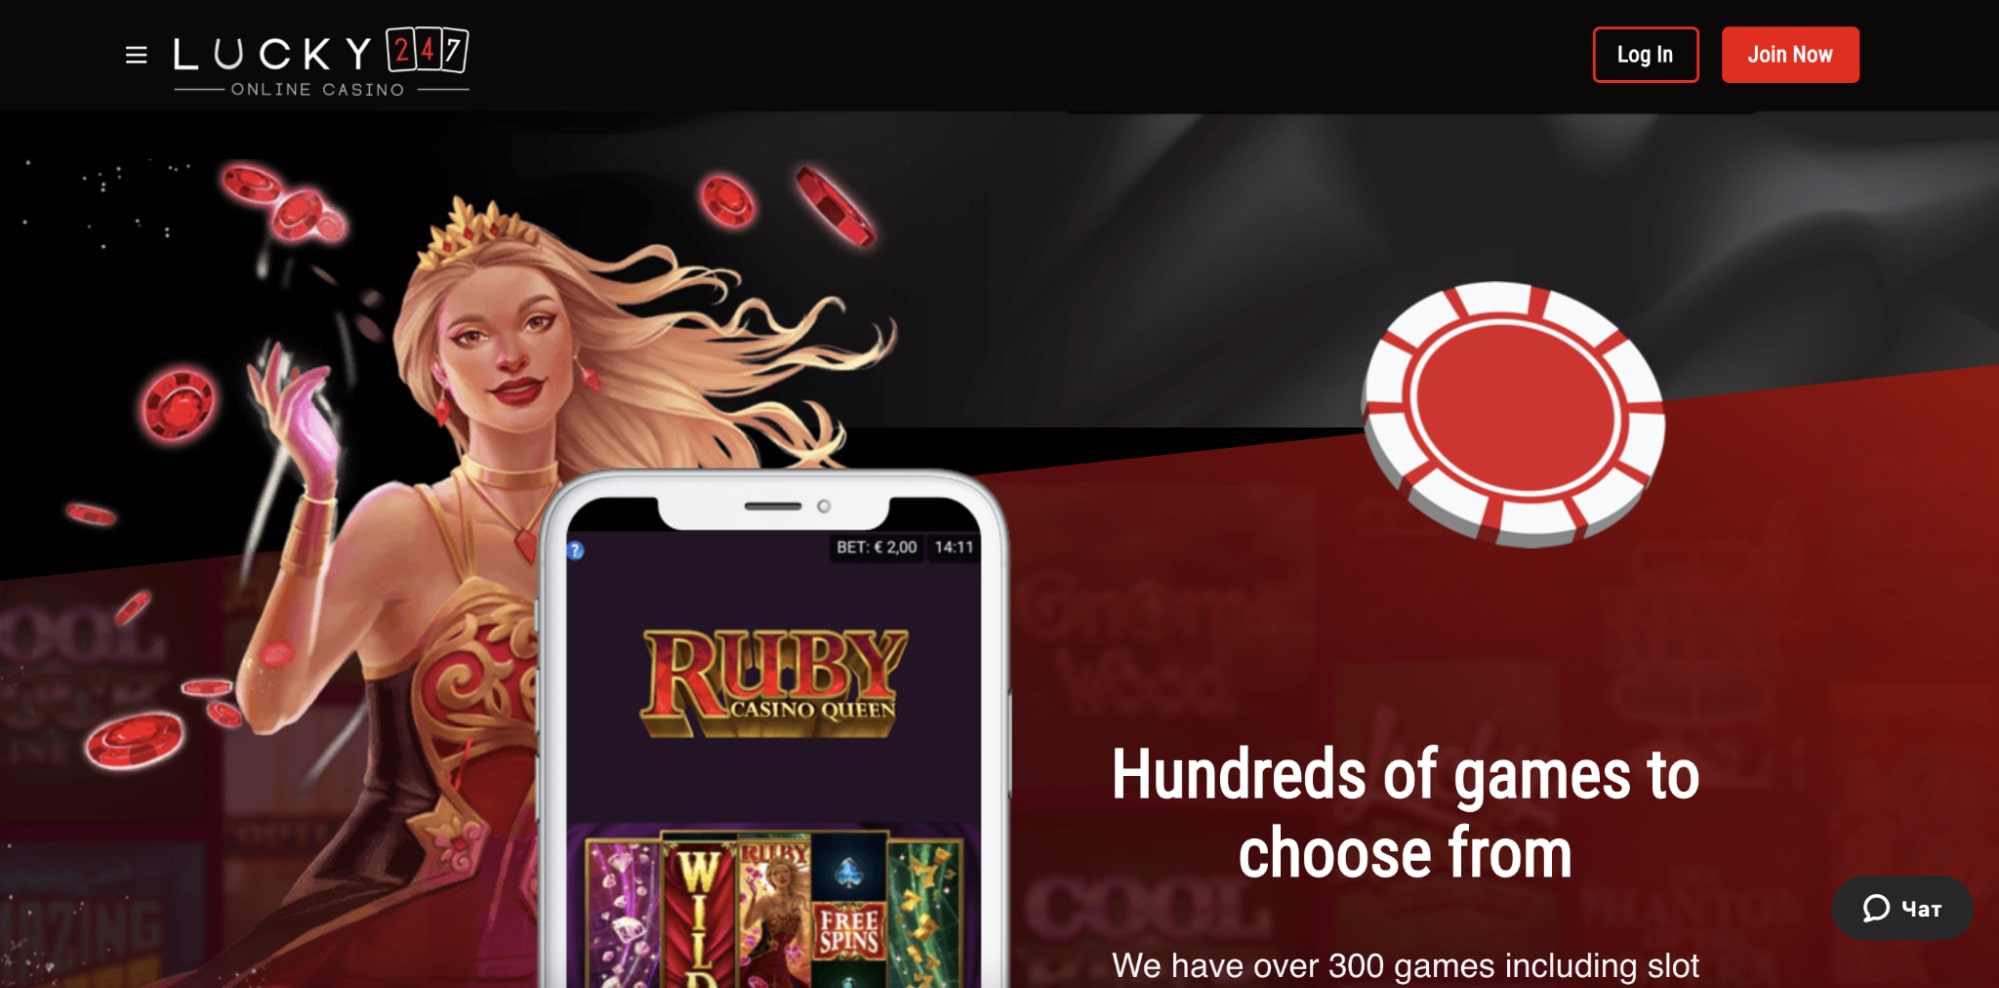 Lucky247 is one of the newest casino operators in the UK